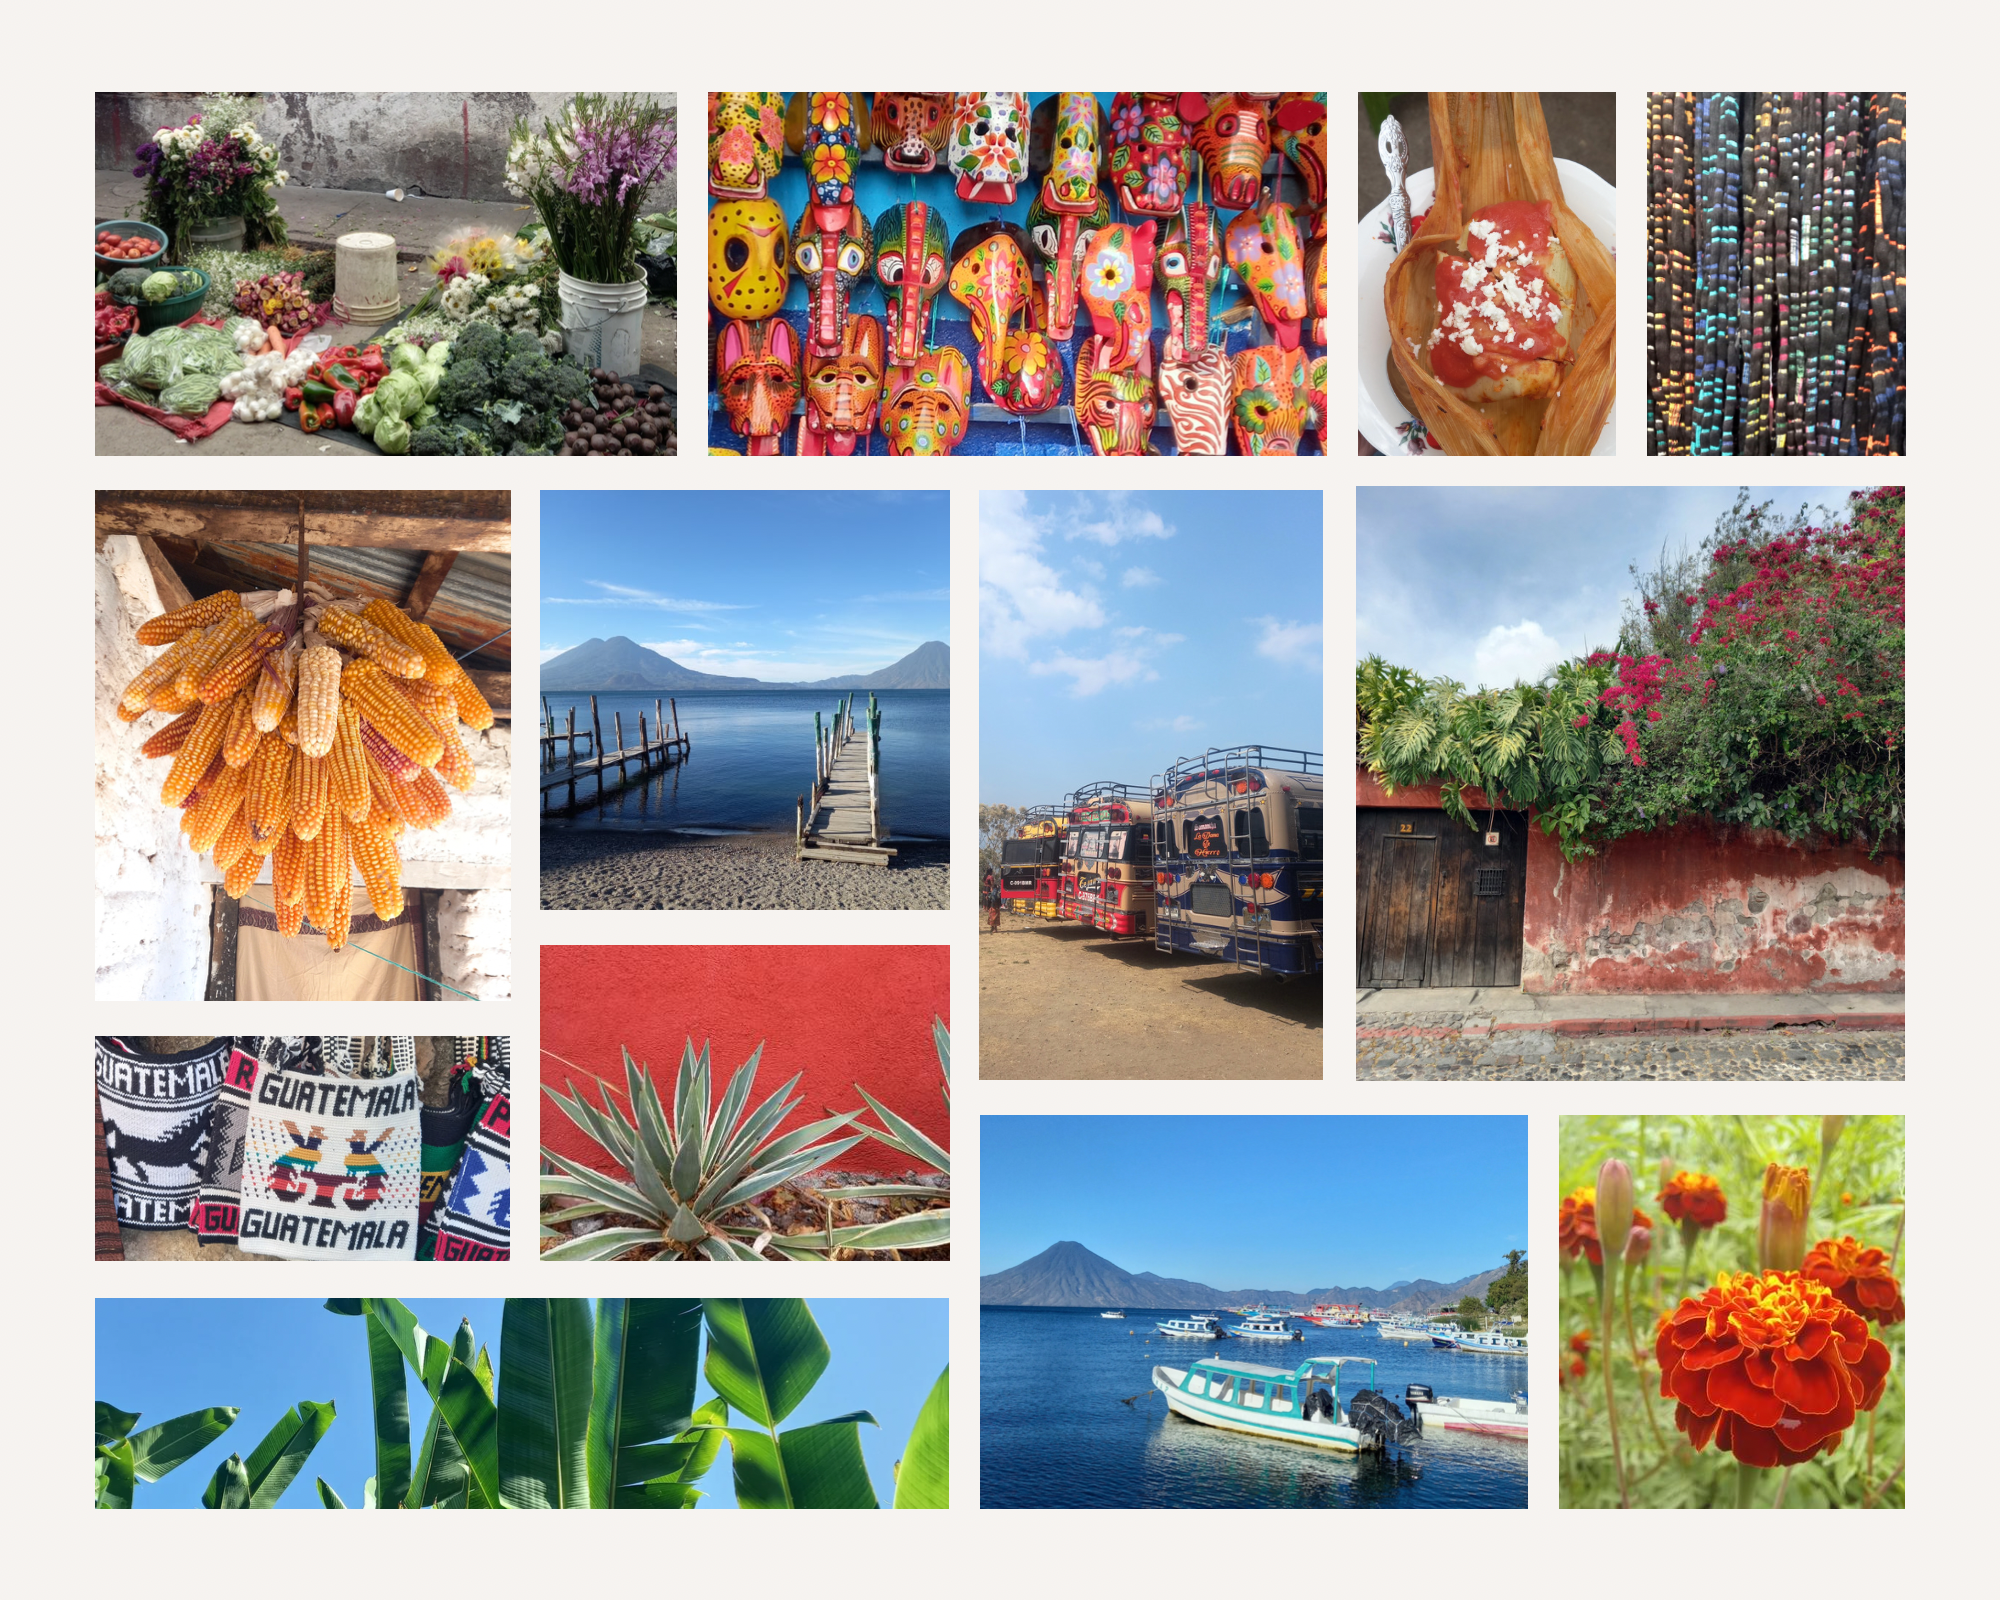 Photo collage with thirteen bright and colorful images of daily life in Guatemala including Lake Atitlán, colorful walls in Antigua, corn harvest, handmade masks, Guatemalan textiles and nature